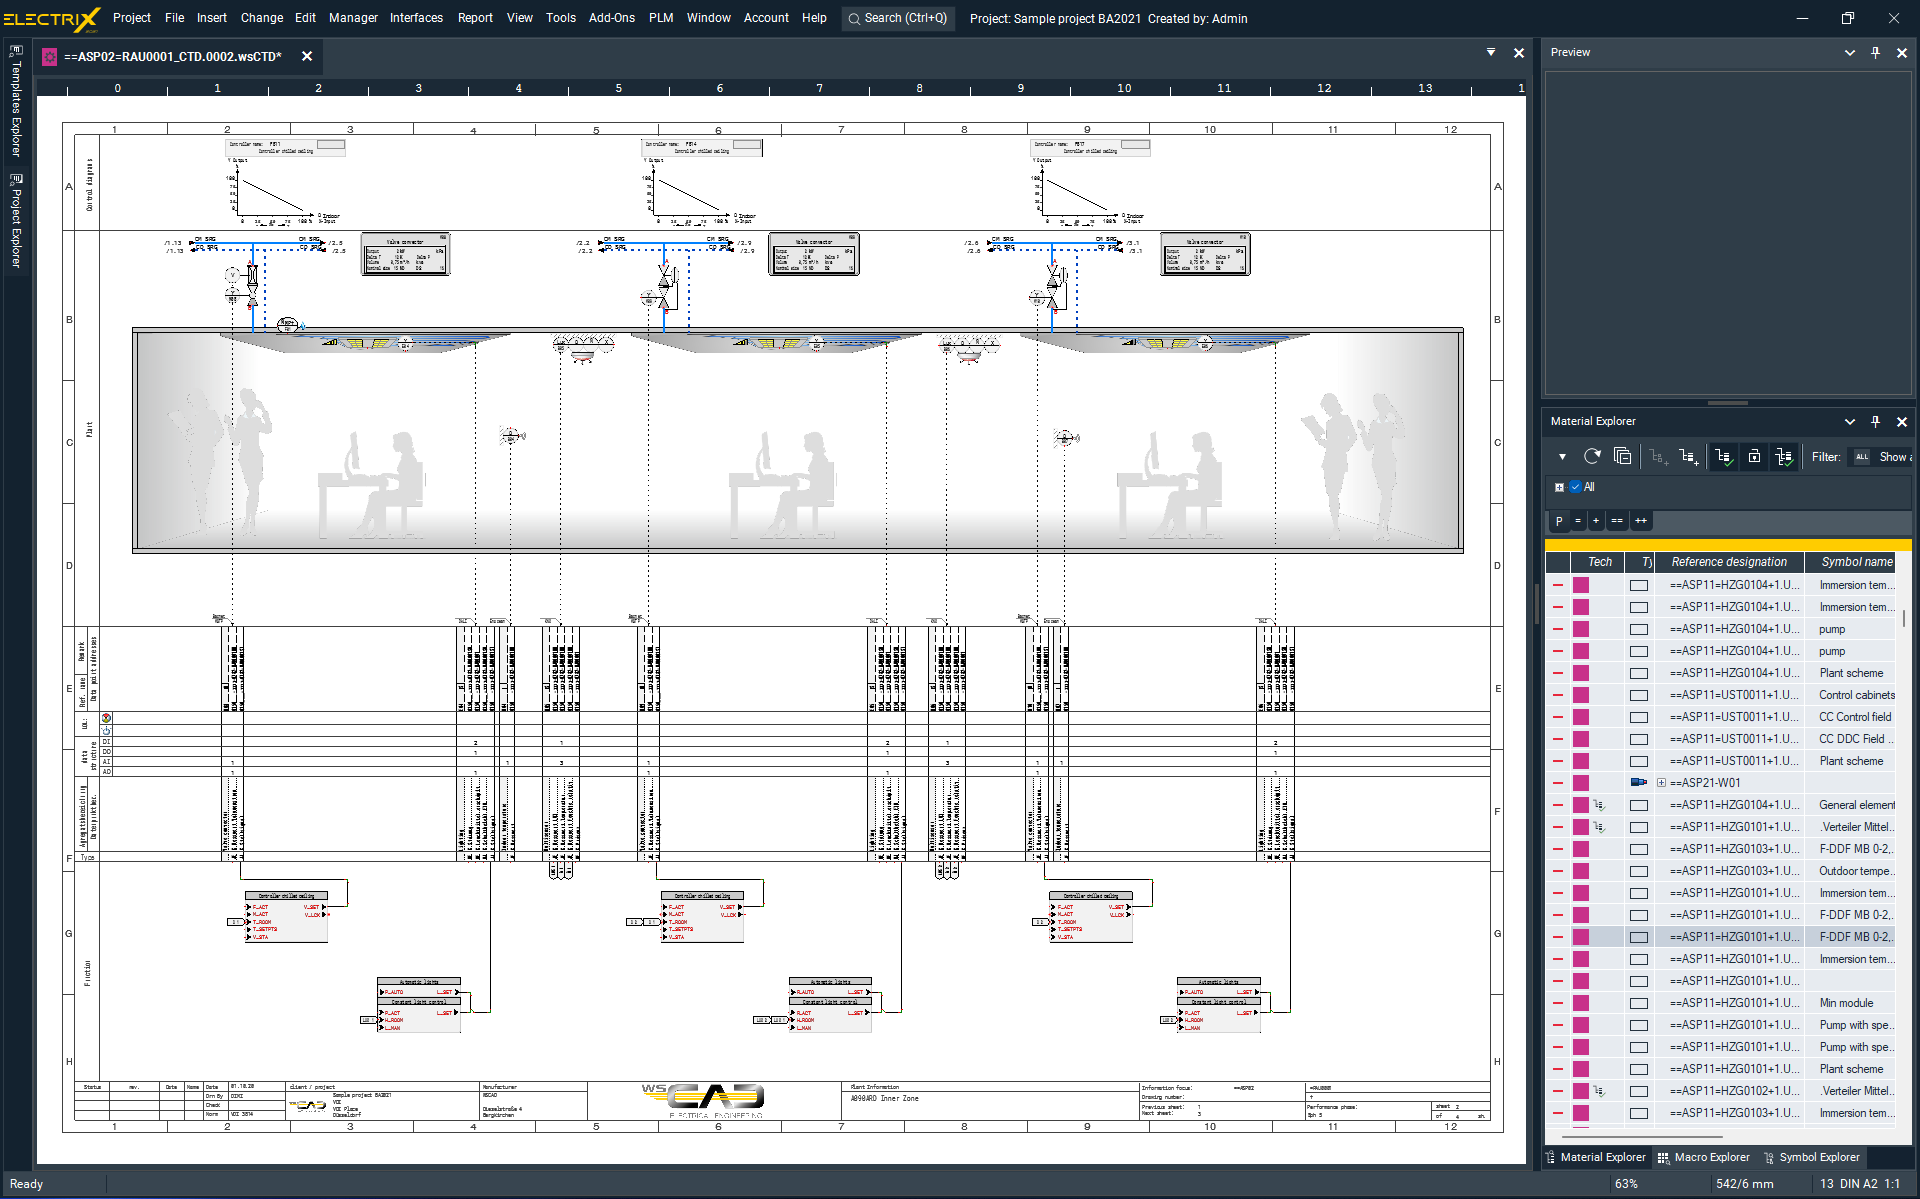 Bulding automation - Design layouts and control schematics using WSCAD Building Automation software. Function lists can be structured according to the guidelines VDI 3814 und VDI 3813 for the entire building automation.